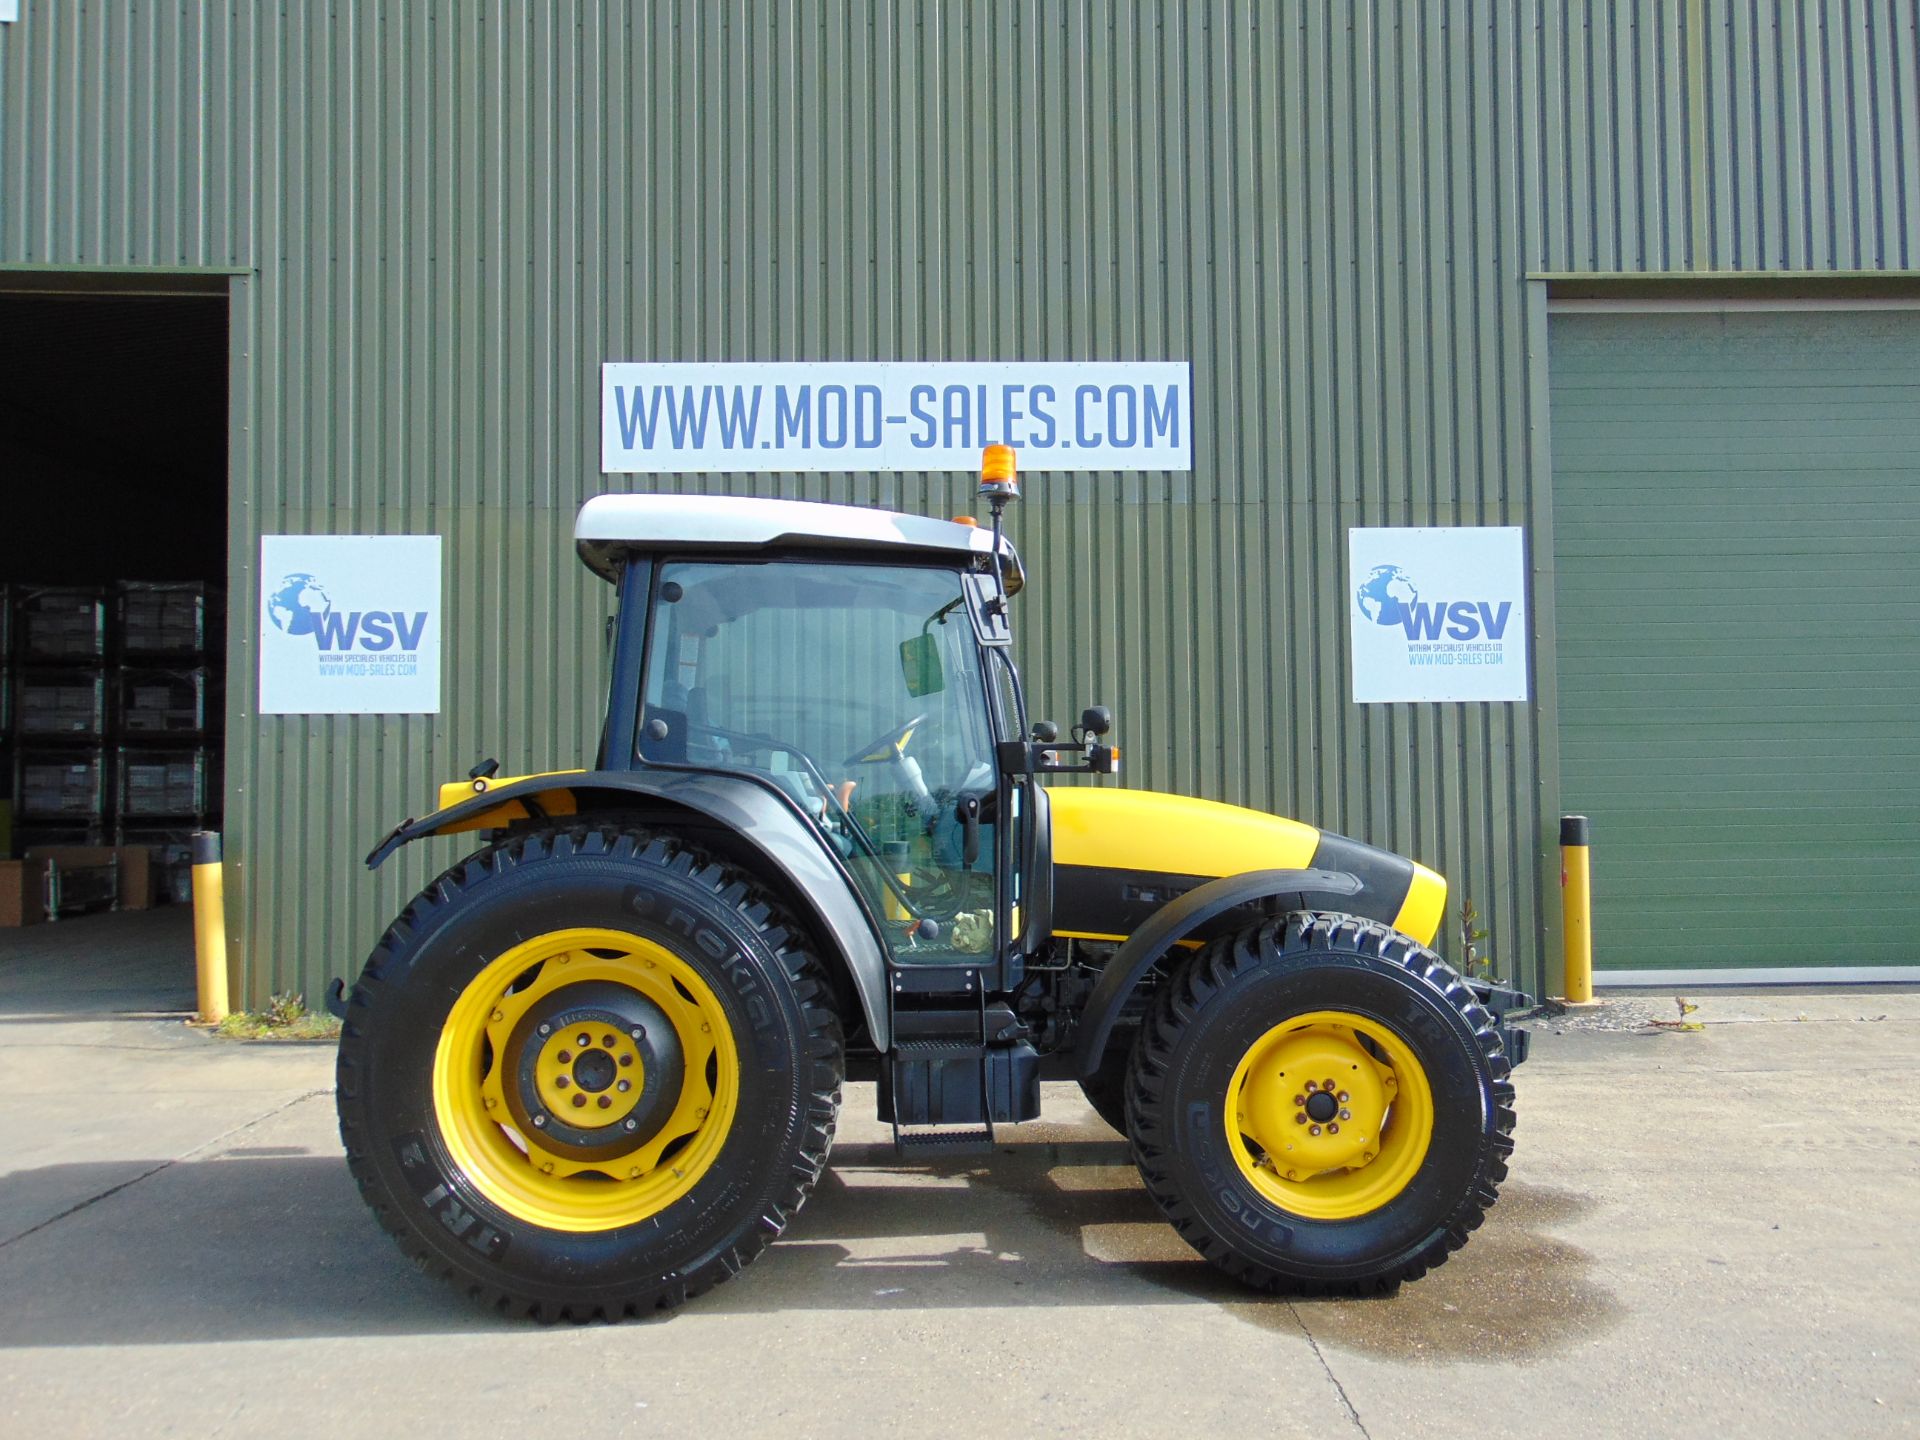 2010 Deutz-Fahr Agrofarm 420 - 4WD 97HP Agricultural Tractor 967 hrs only From MOD - Image 2 of 56